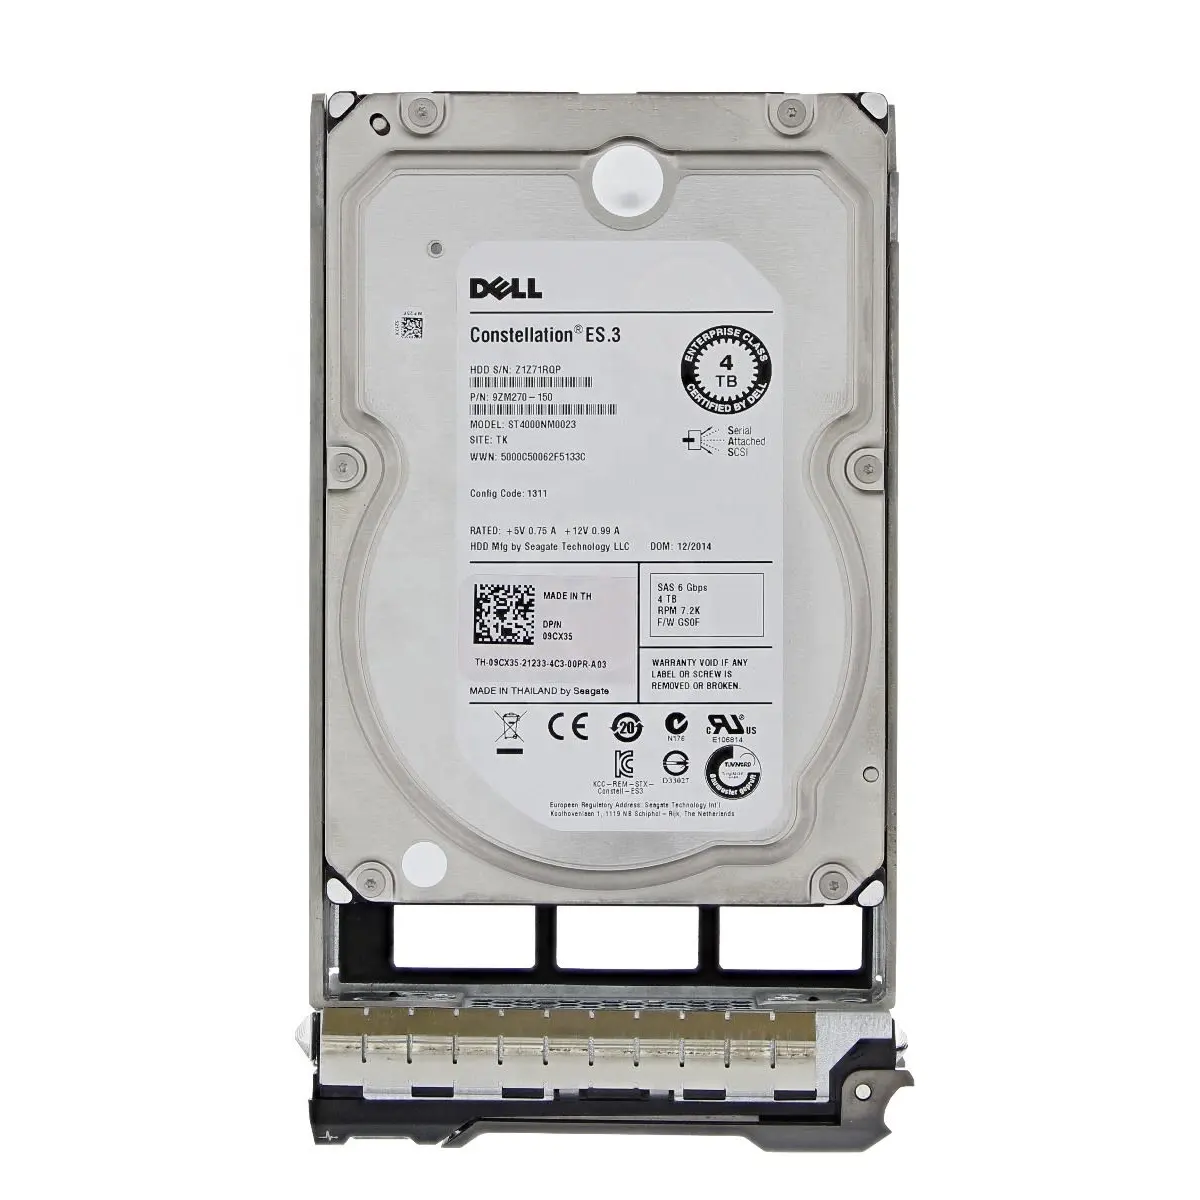 Wholesale New HDD 4TB SAS 7.2K 3.5inch 6G 512n Hard Disk Drive 09CX35 ST4000NM0023 Hard Drives with Tray for Dell Server